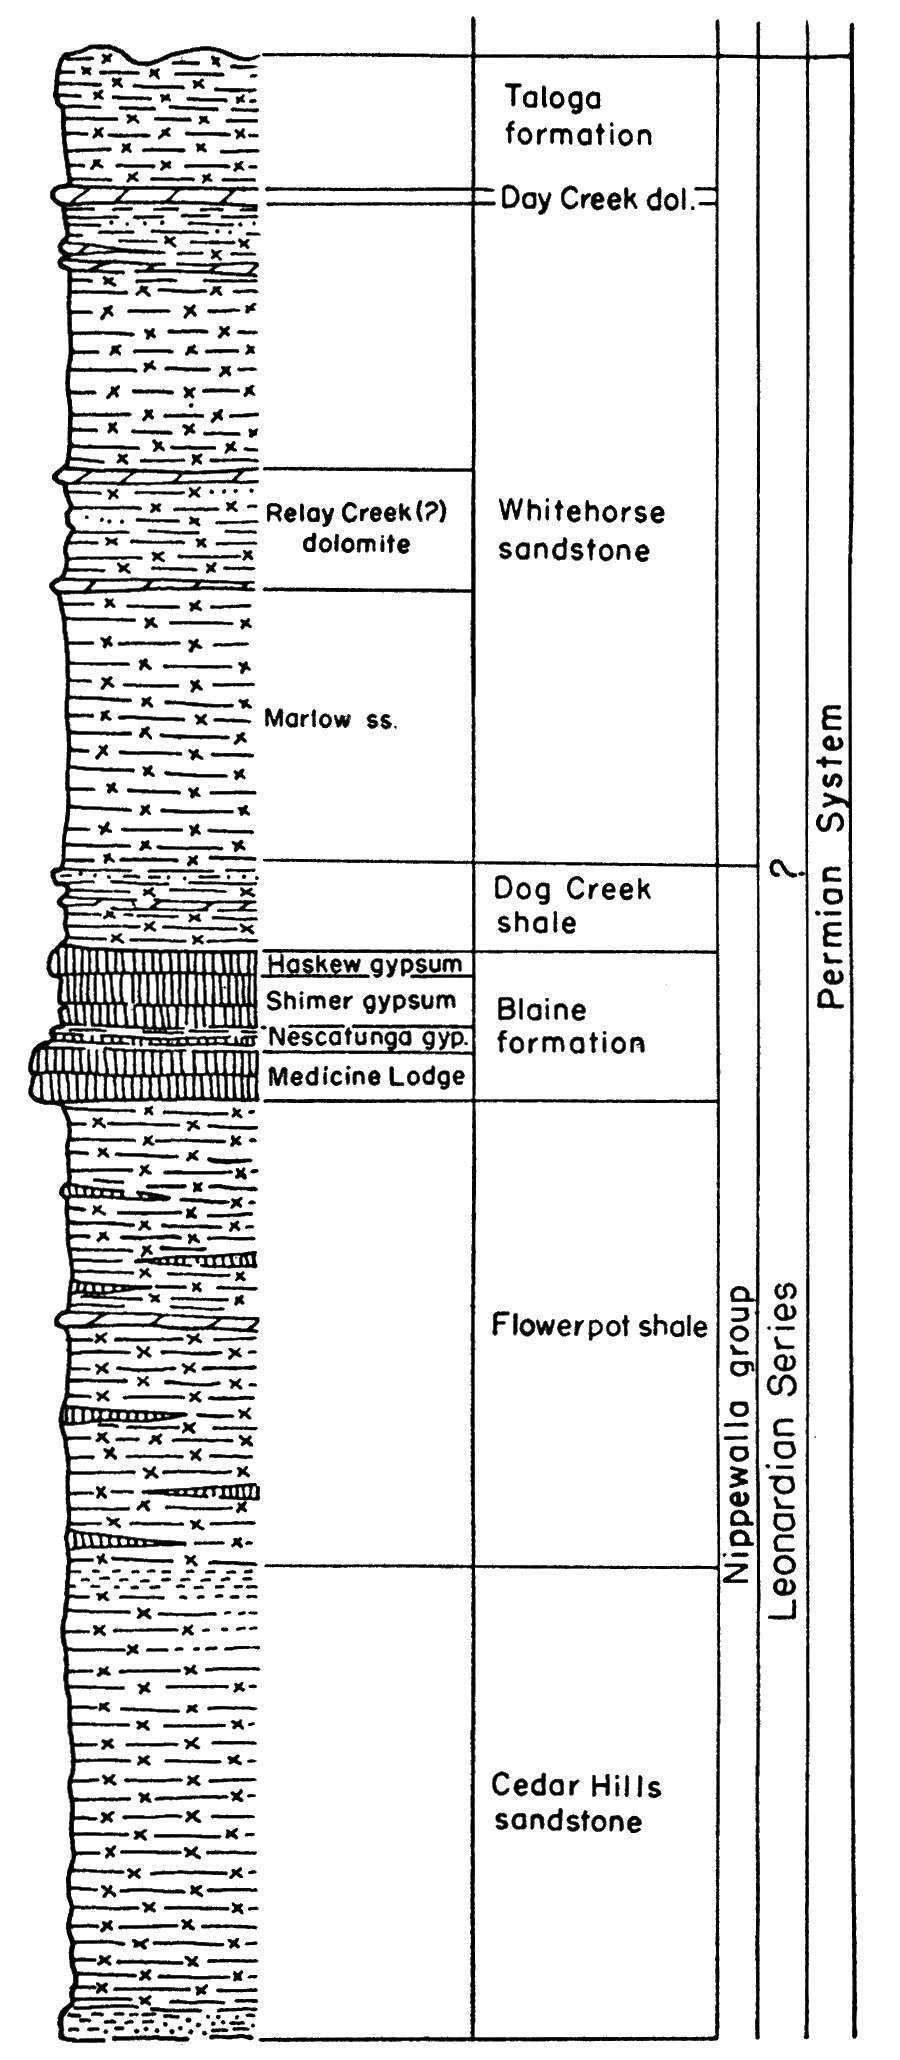 Generalized stratigraphic section of Permian rocks in Kansas. Note that the Wellington rocks are represented as subsurface rocks.